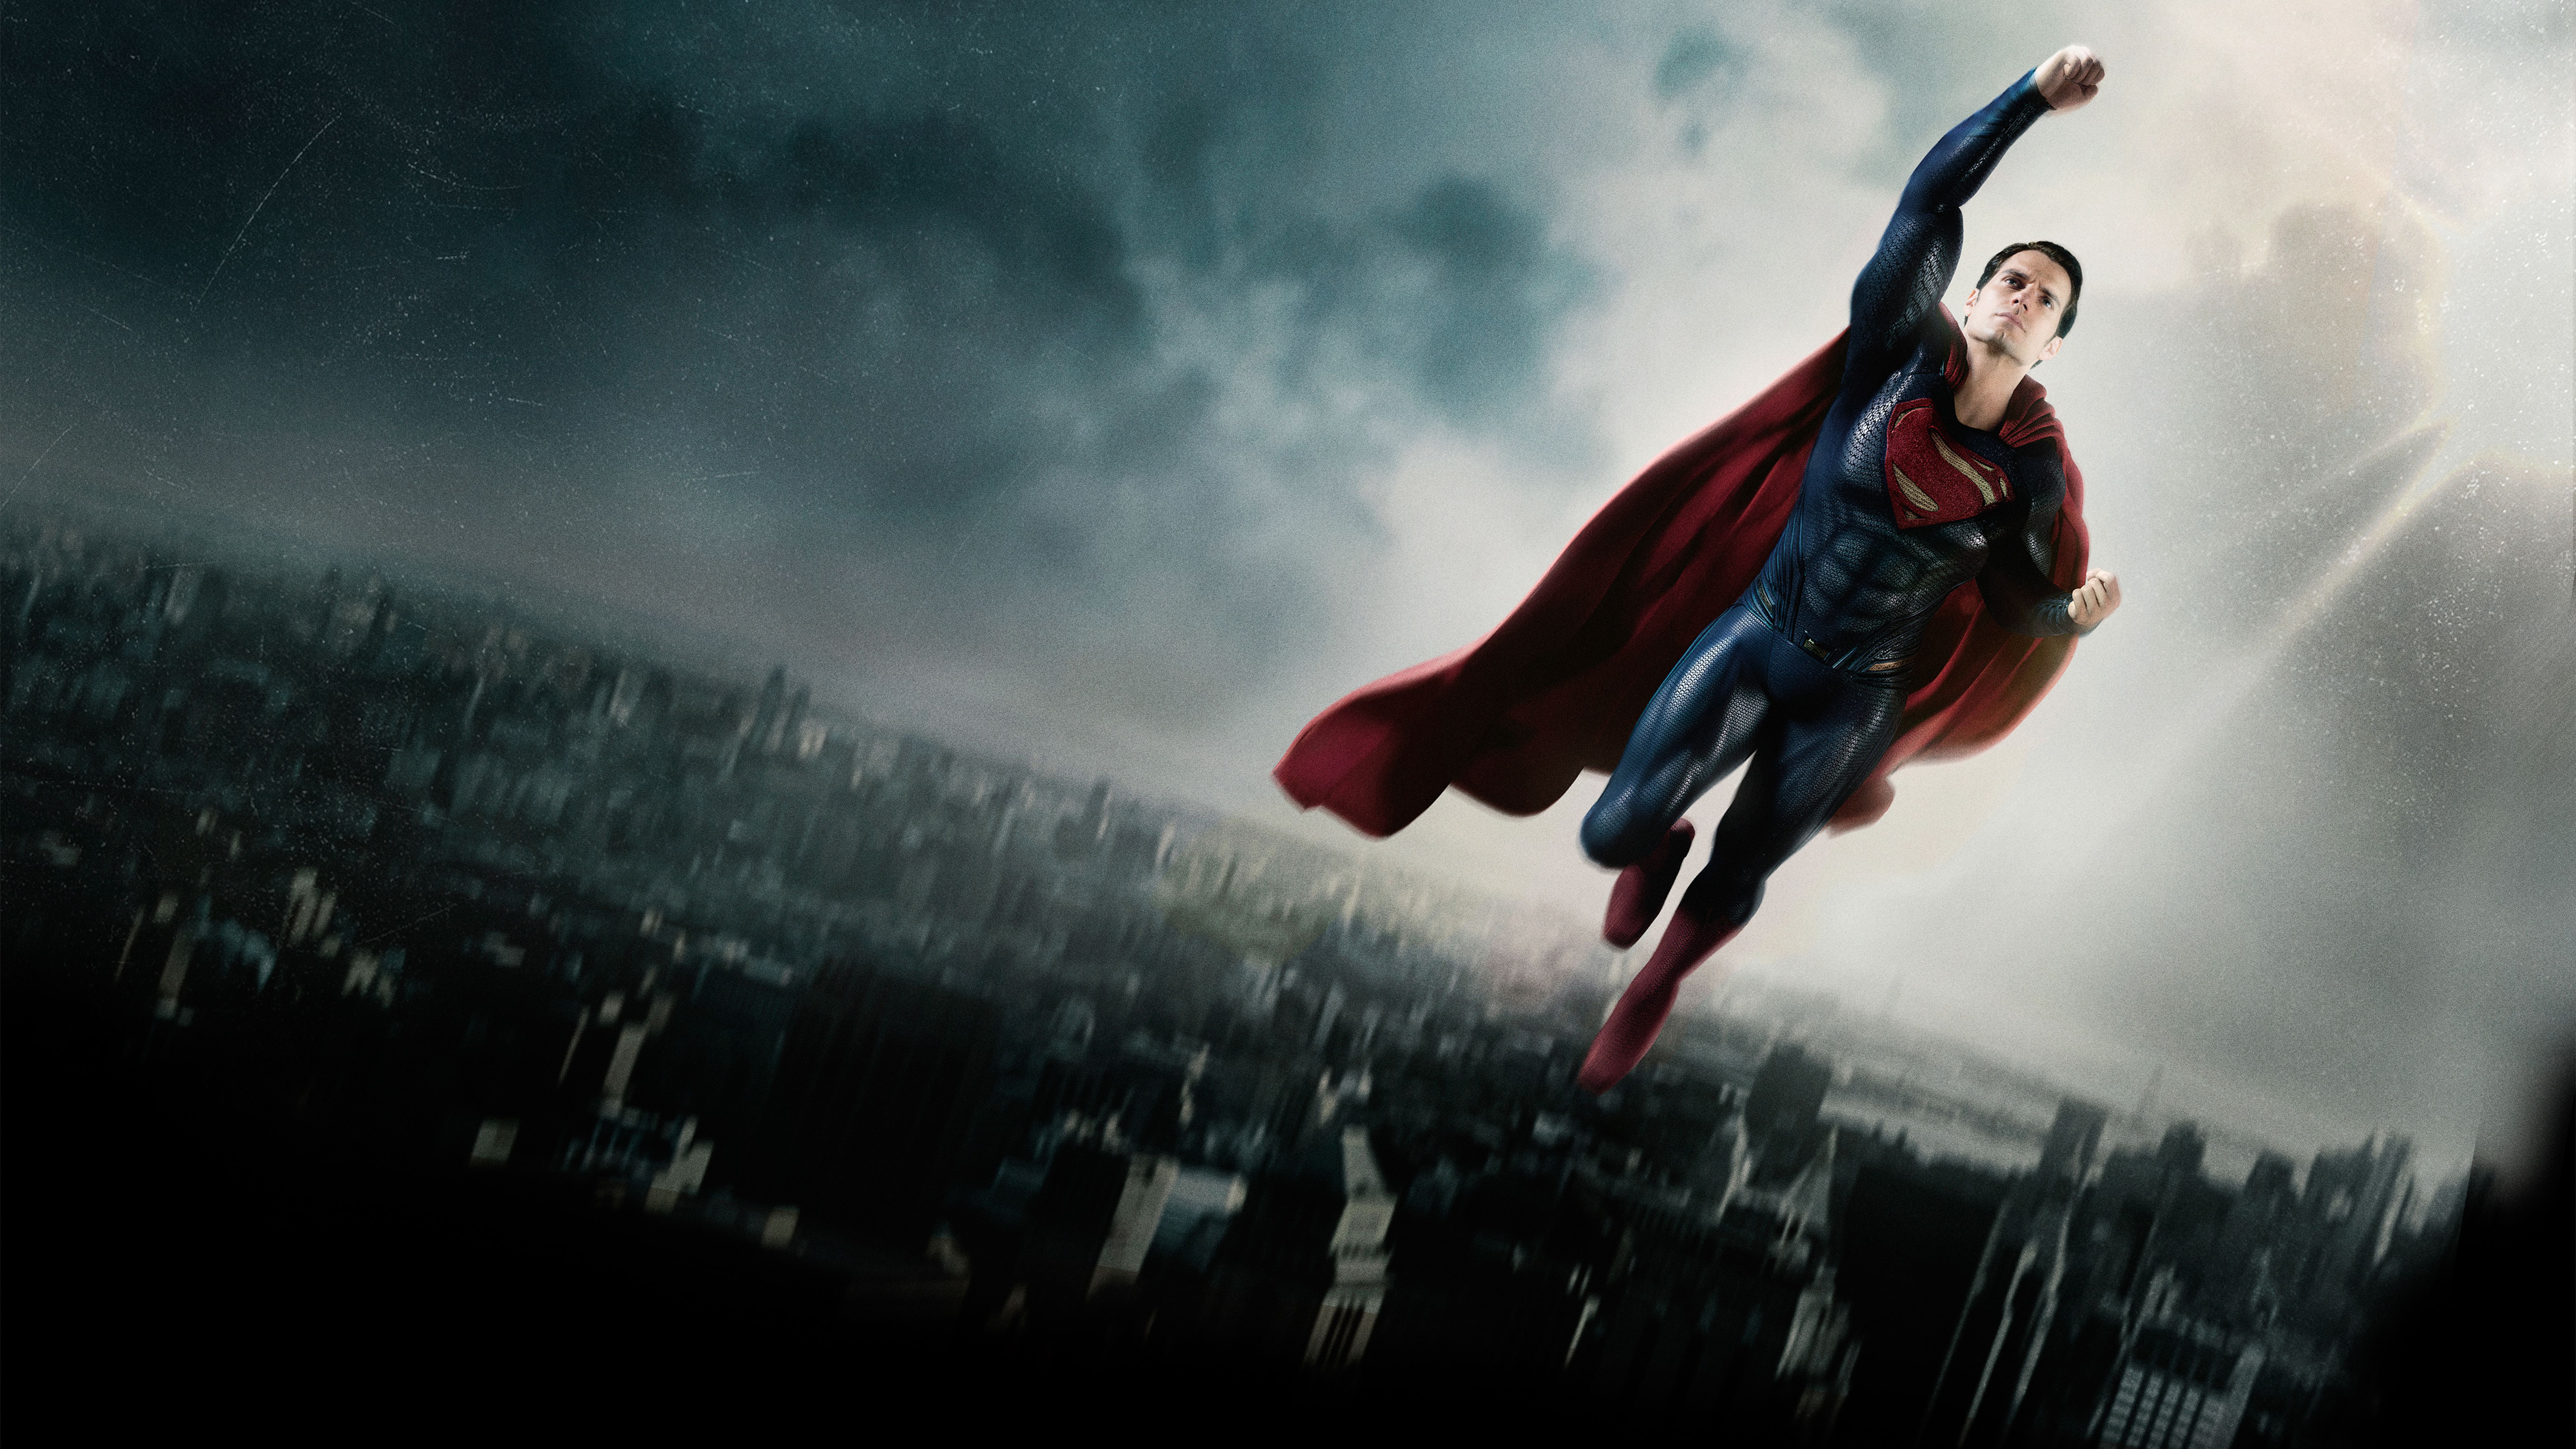 Superman Wallpapers and Backgrounds - WallpaperCG